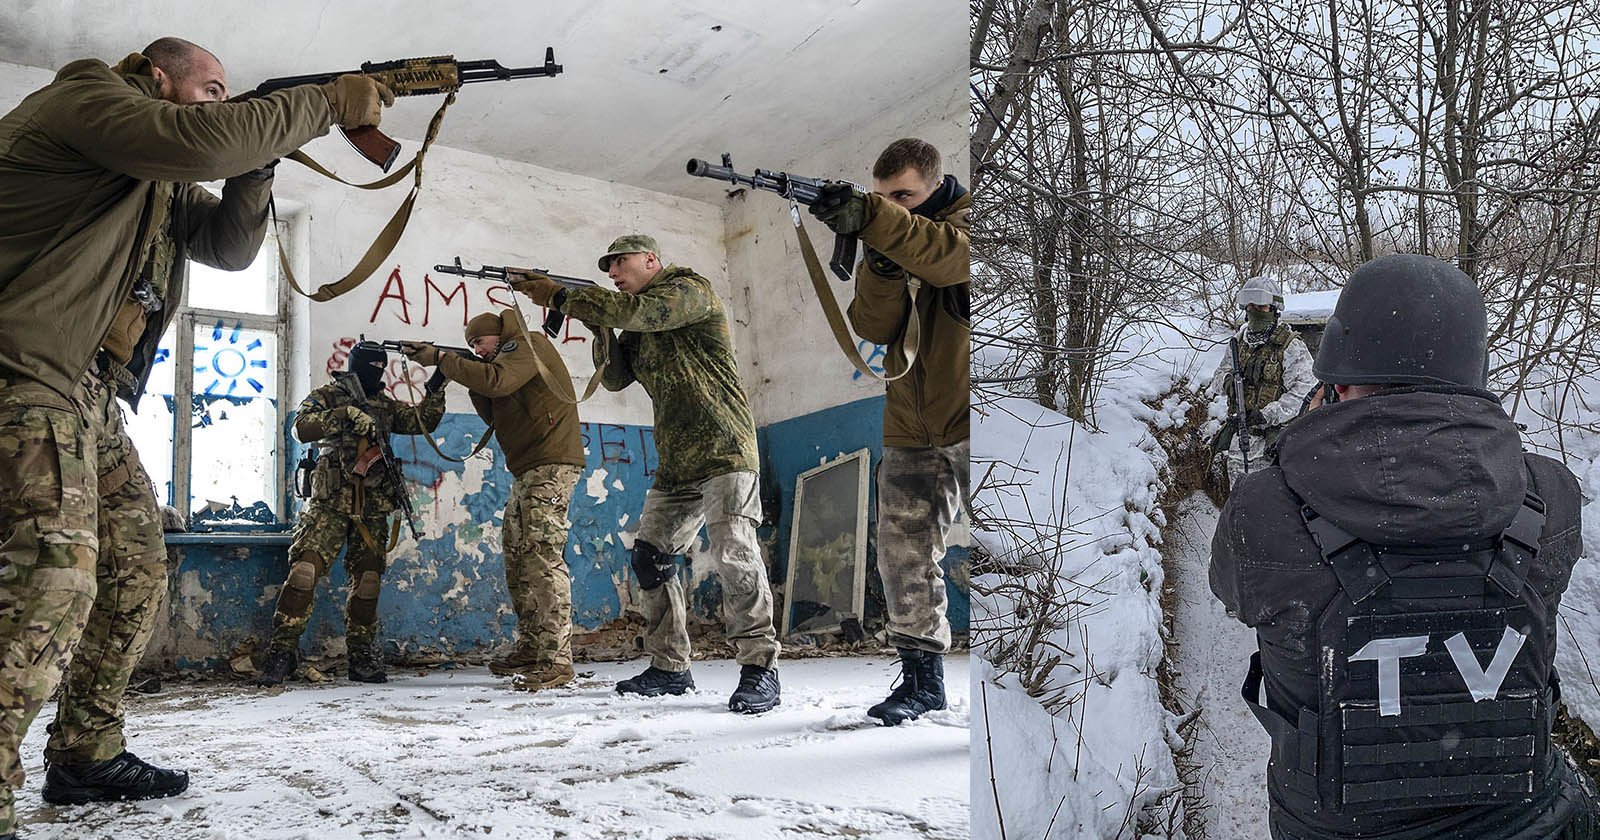  how stay safe while photographing war ukraine 